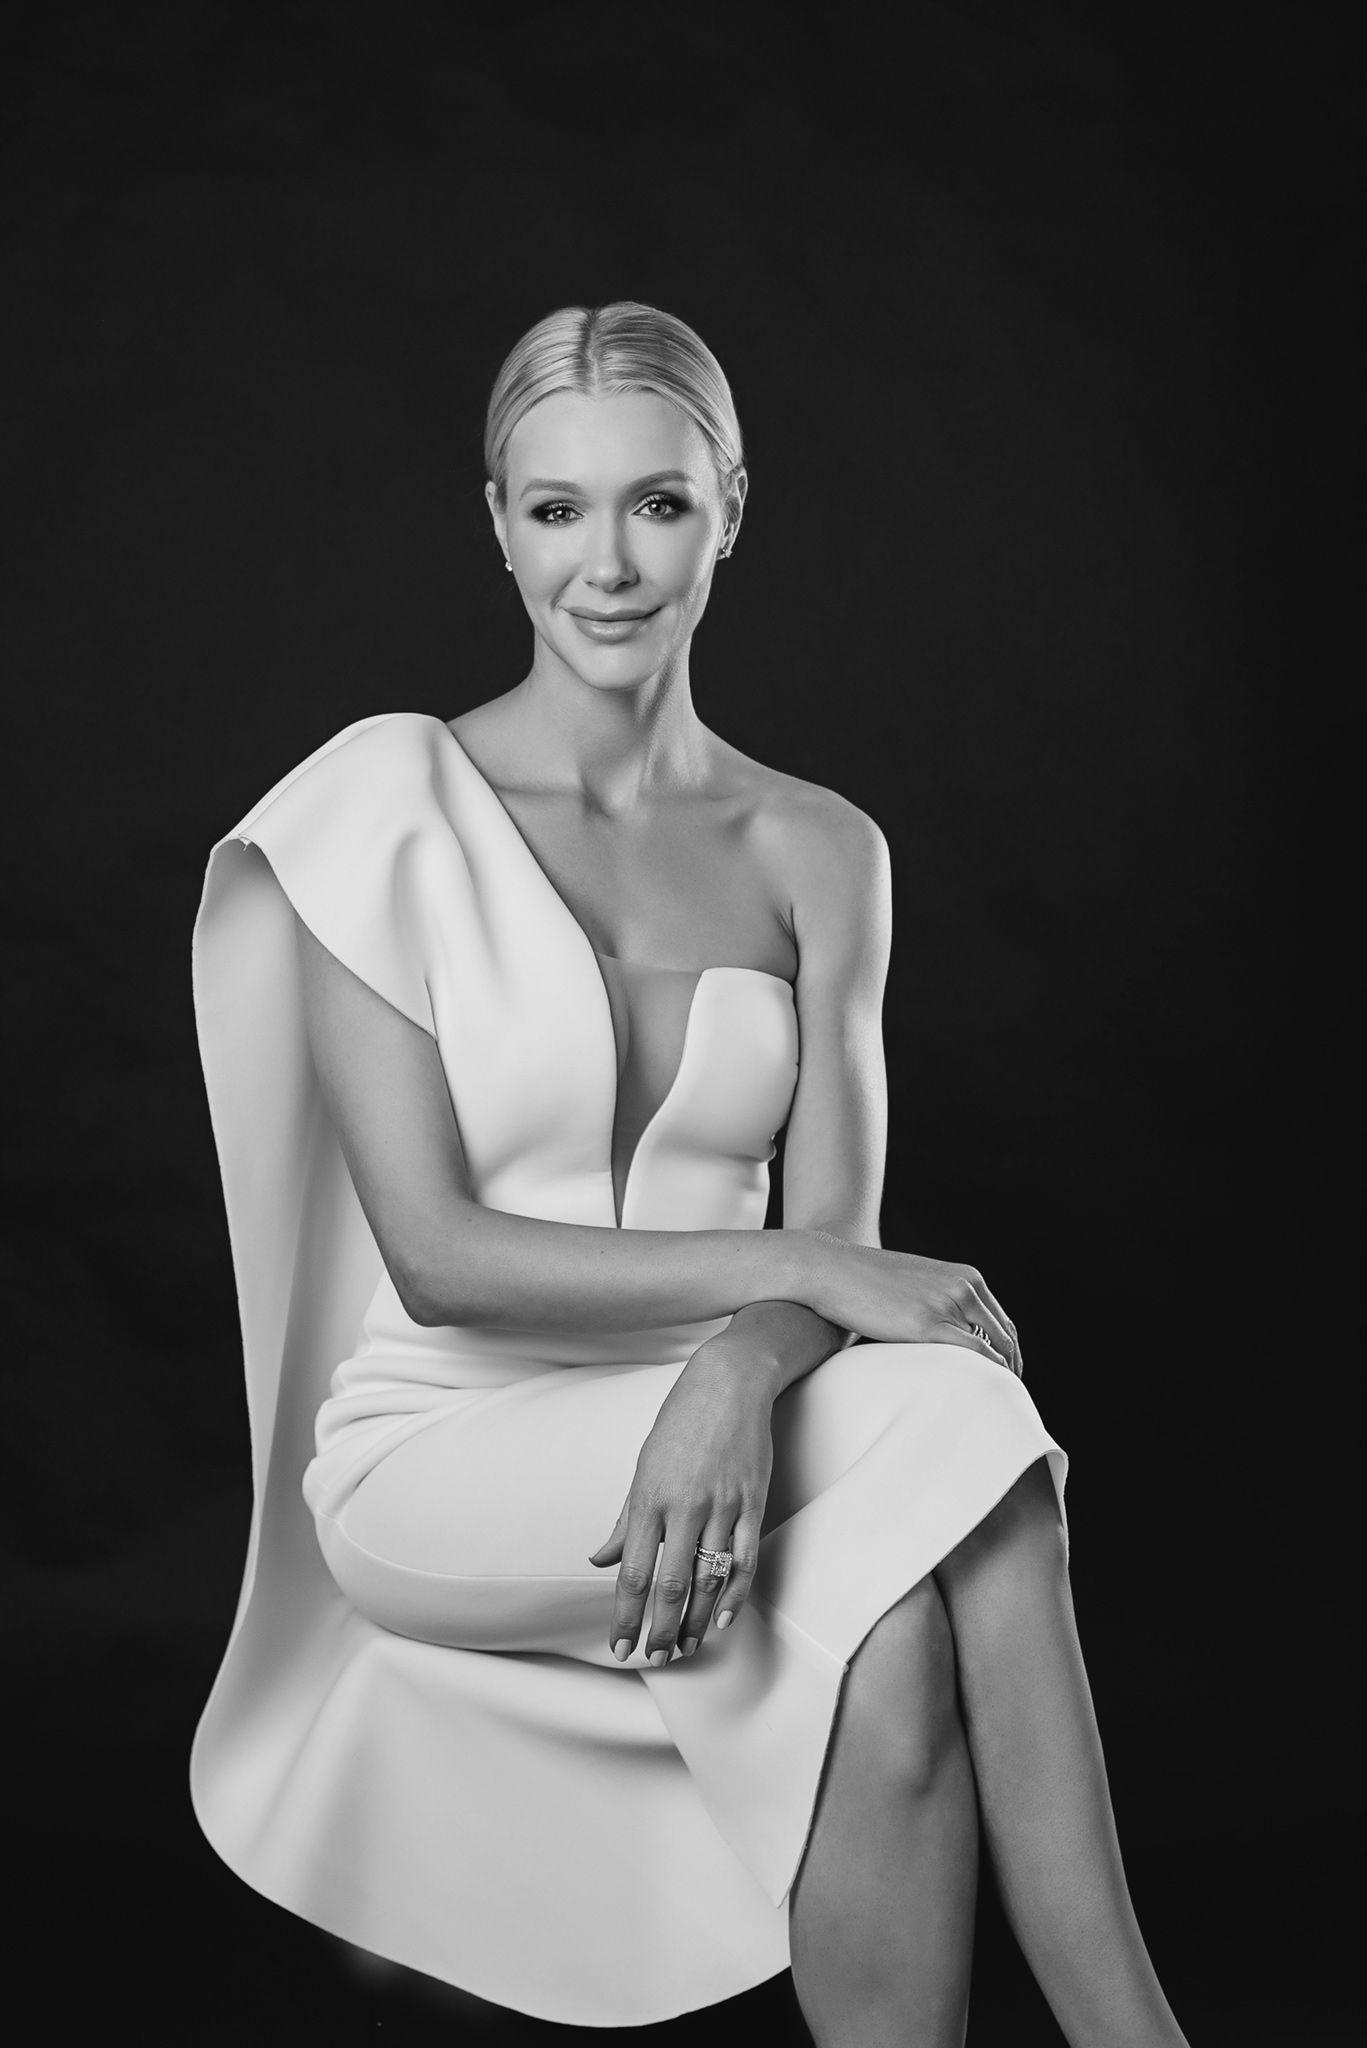 blonde woman is posing in an elegant way in a black and white portrait showing the magic of professional photography